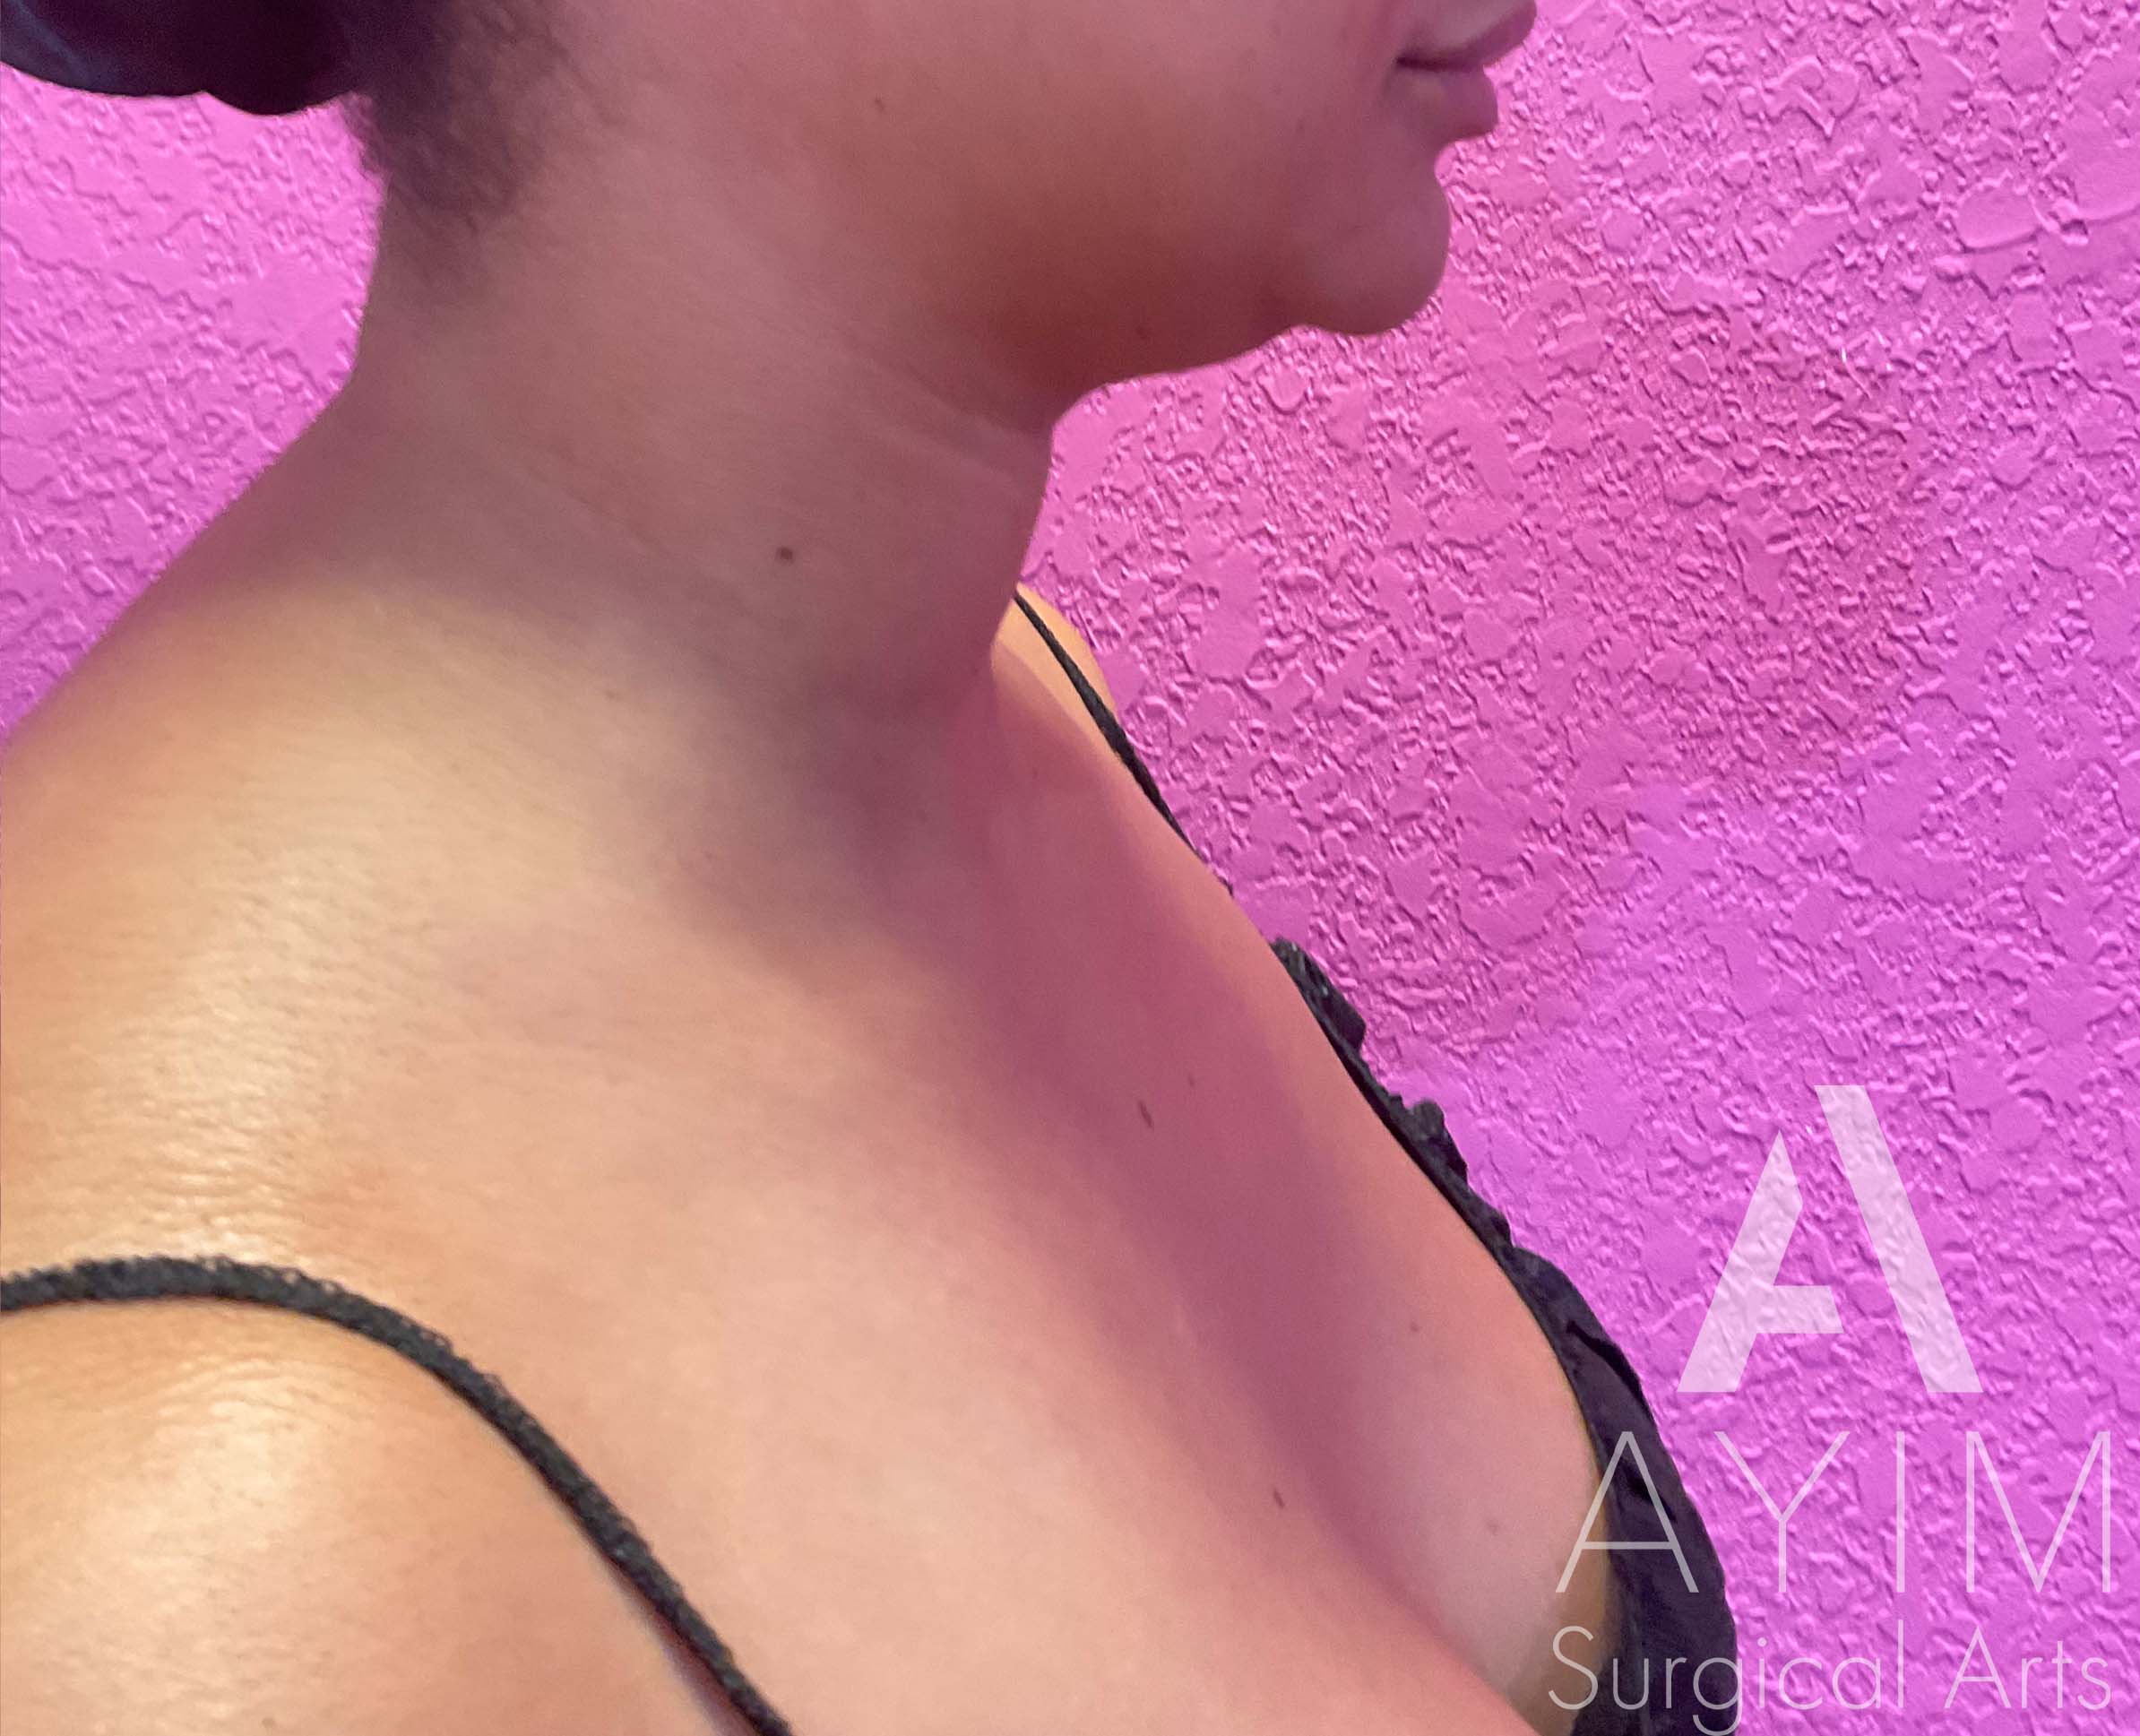 Liposuction of Chin and Neck Before and After Results